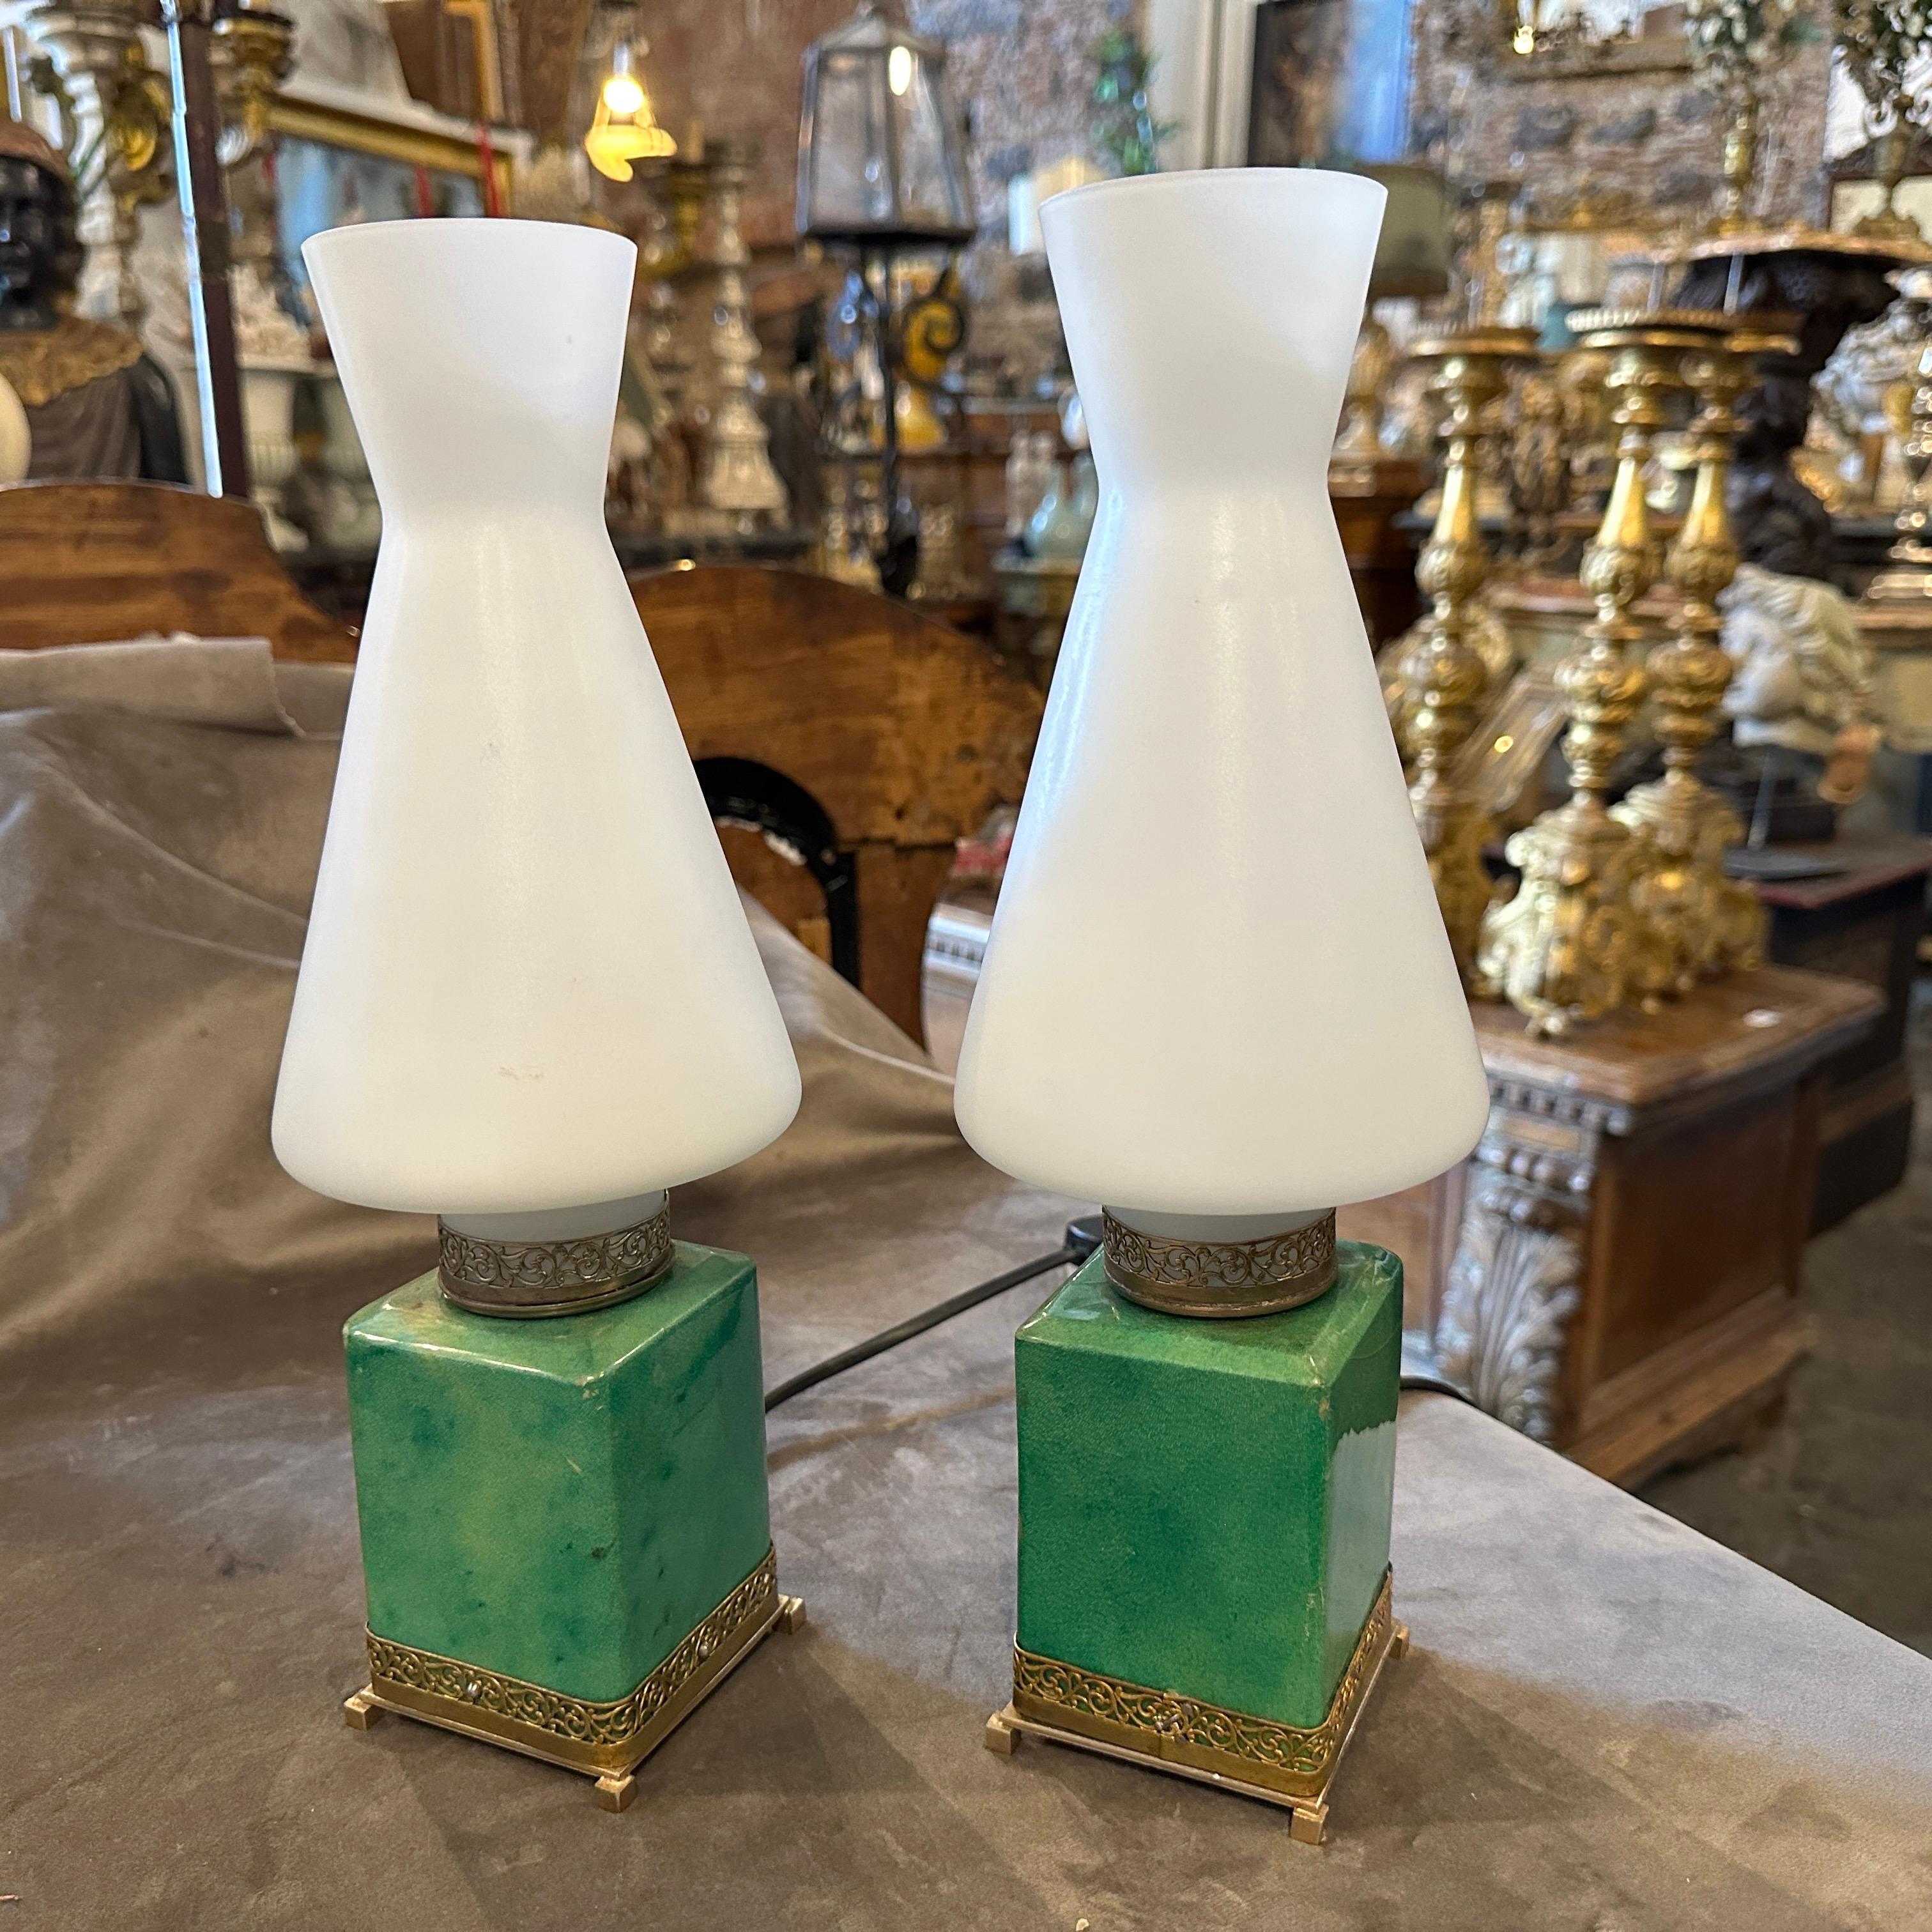 A set of Mid-Century Modern bed lamps designed by Aldo Tura and manufactured by Tura Creazioni in Milano in the Fifties. They have small signs of use and age visible on the photos, they are in working order and labeled on the bottom. The Bed Lamps